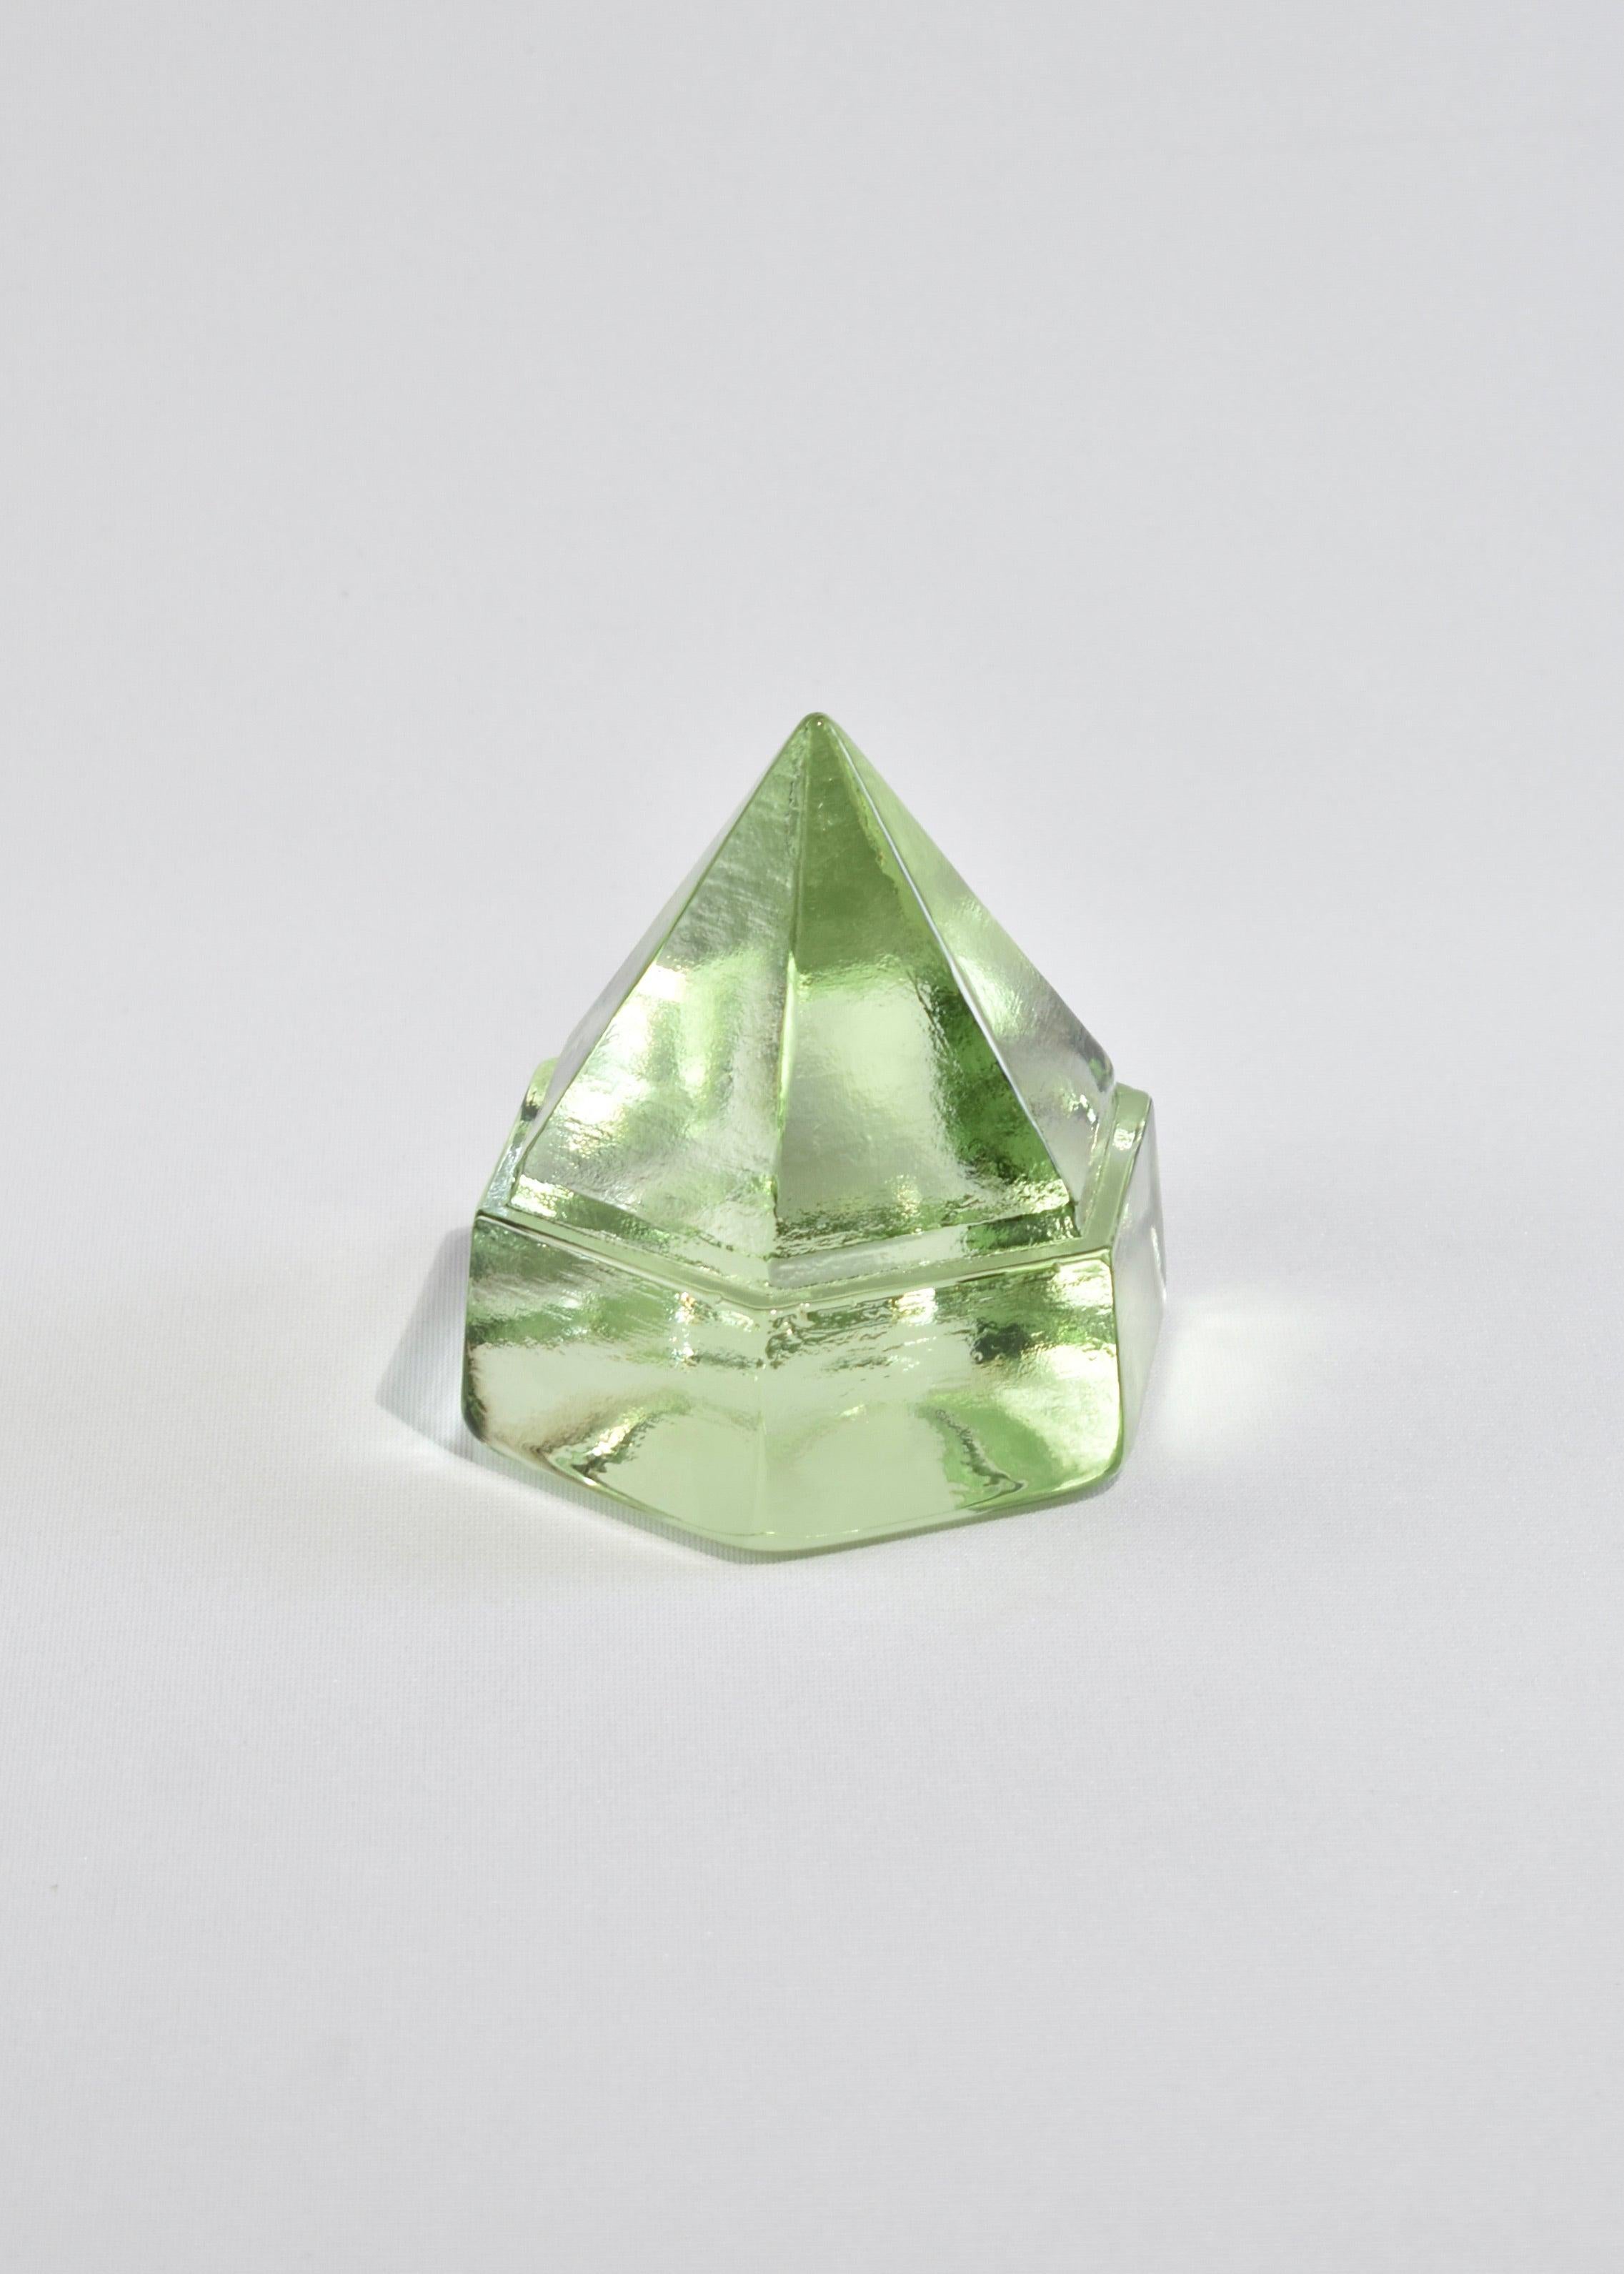 Beautiful light green glass prism. May be used as a paperweight or displayed on its own as a sculptural piece.